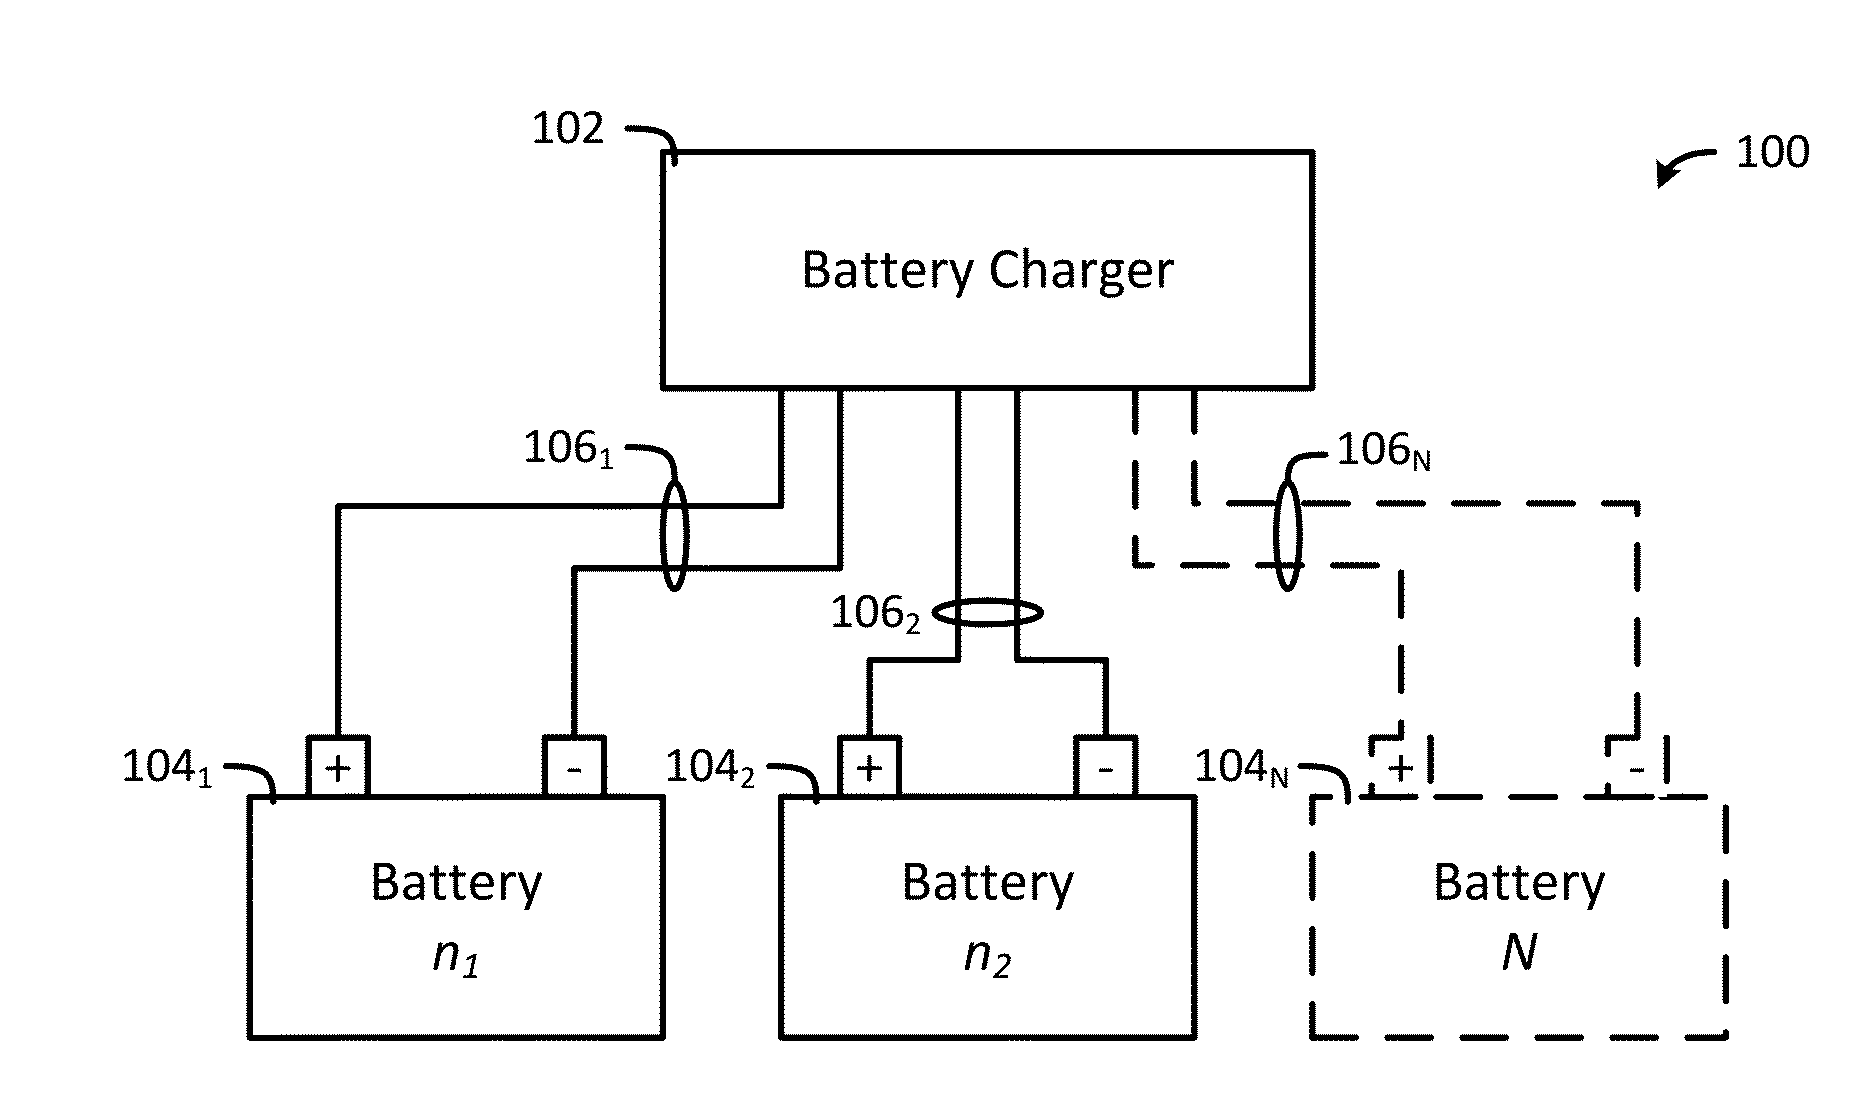 Rapid battery charging